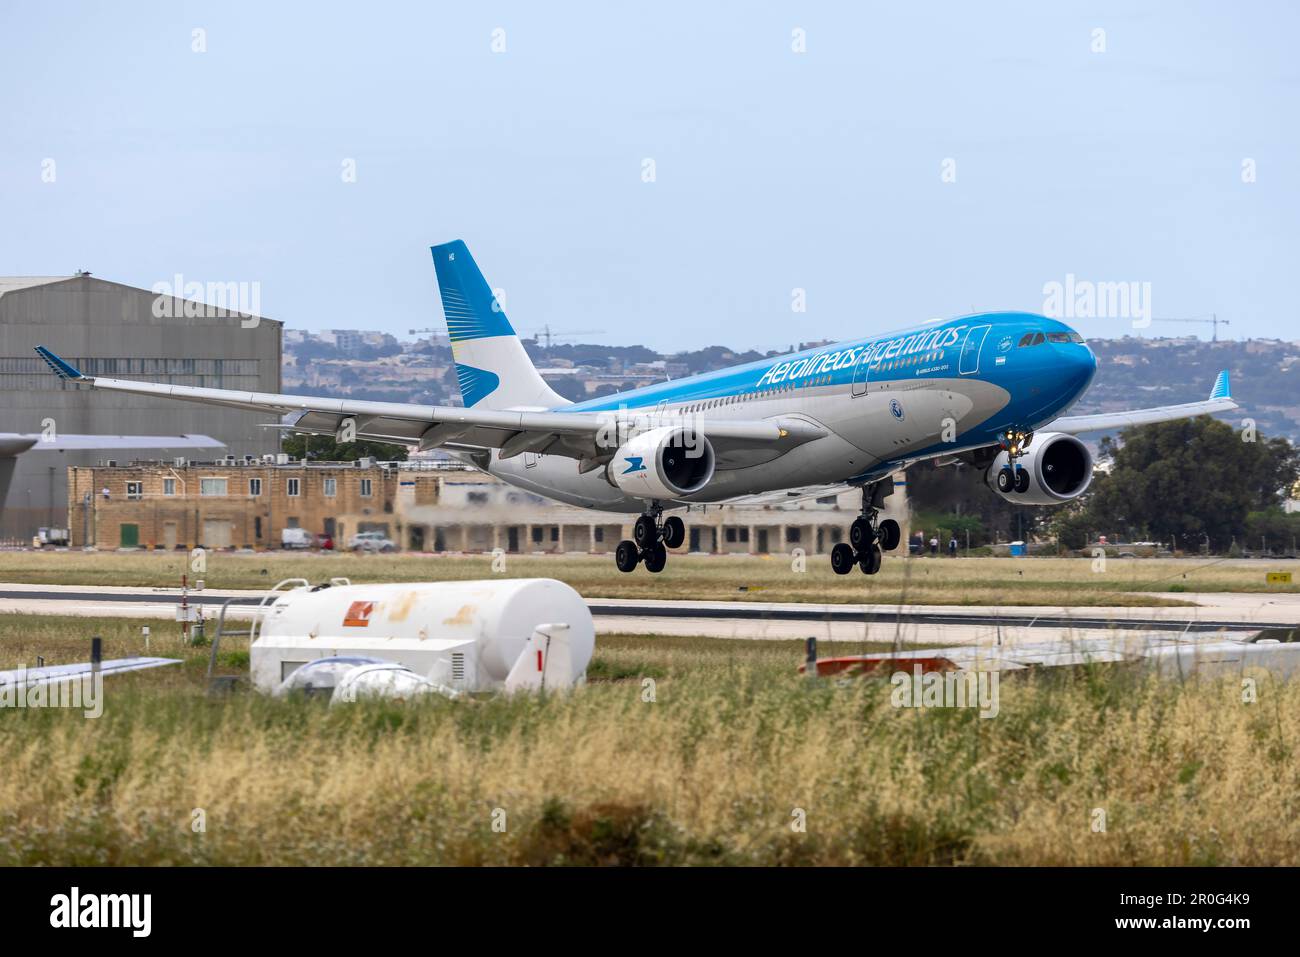 Aerolineas Argentinas Airbus A330-202 (REG: LV-GHQ) arrived from Buenos Aires on a direct flight. Stock Photo